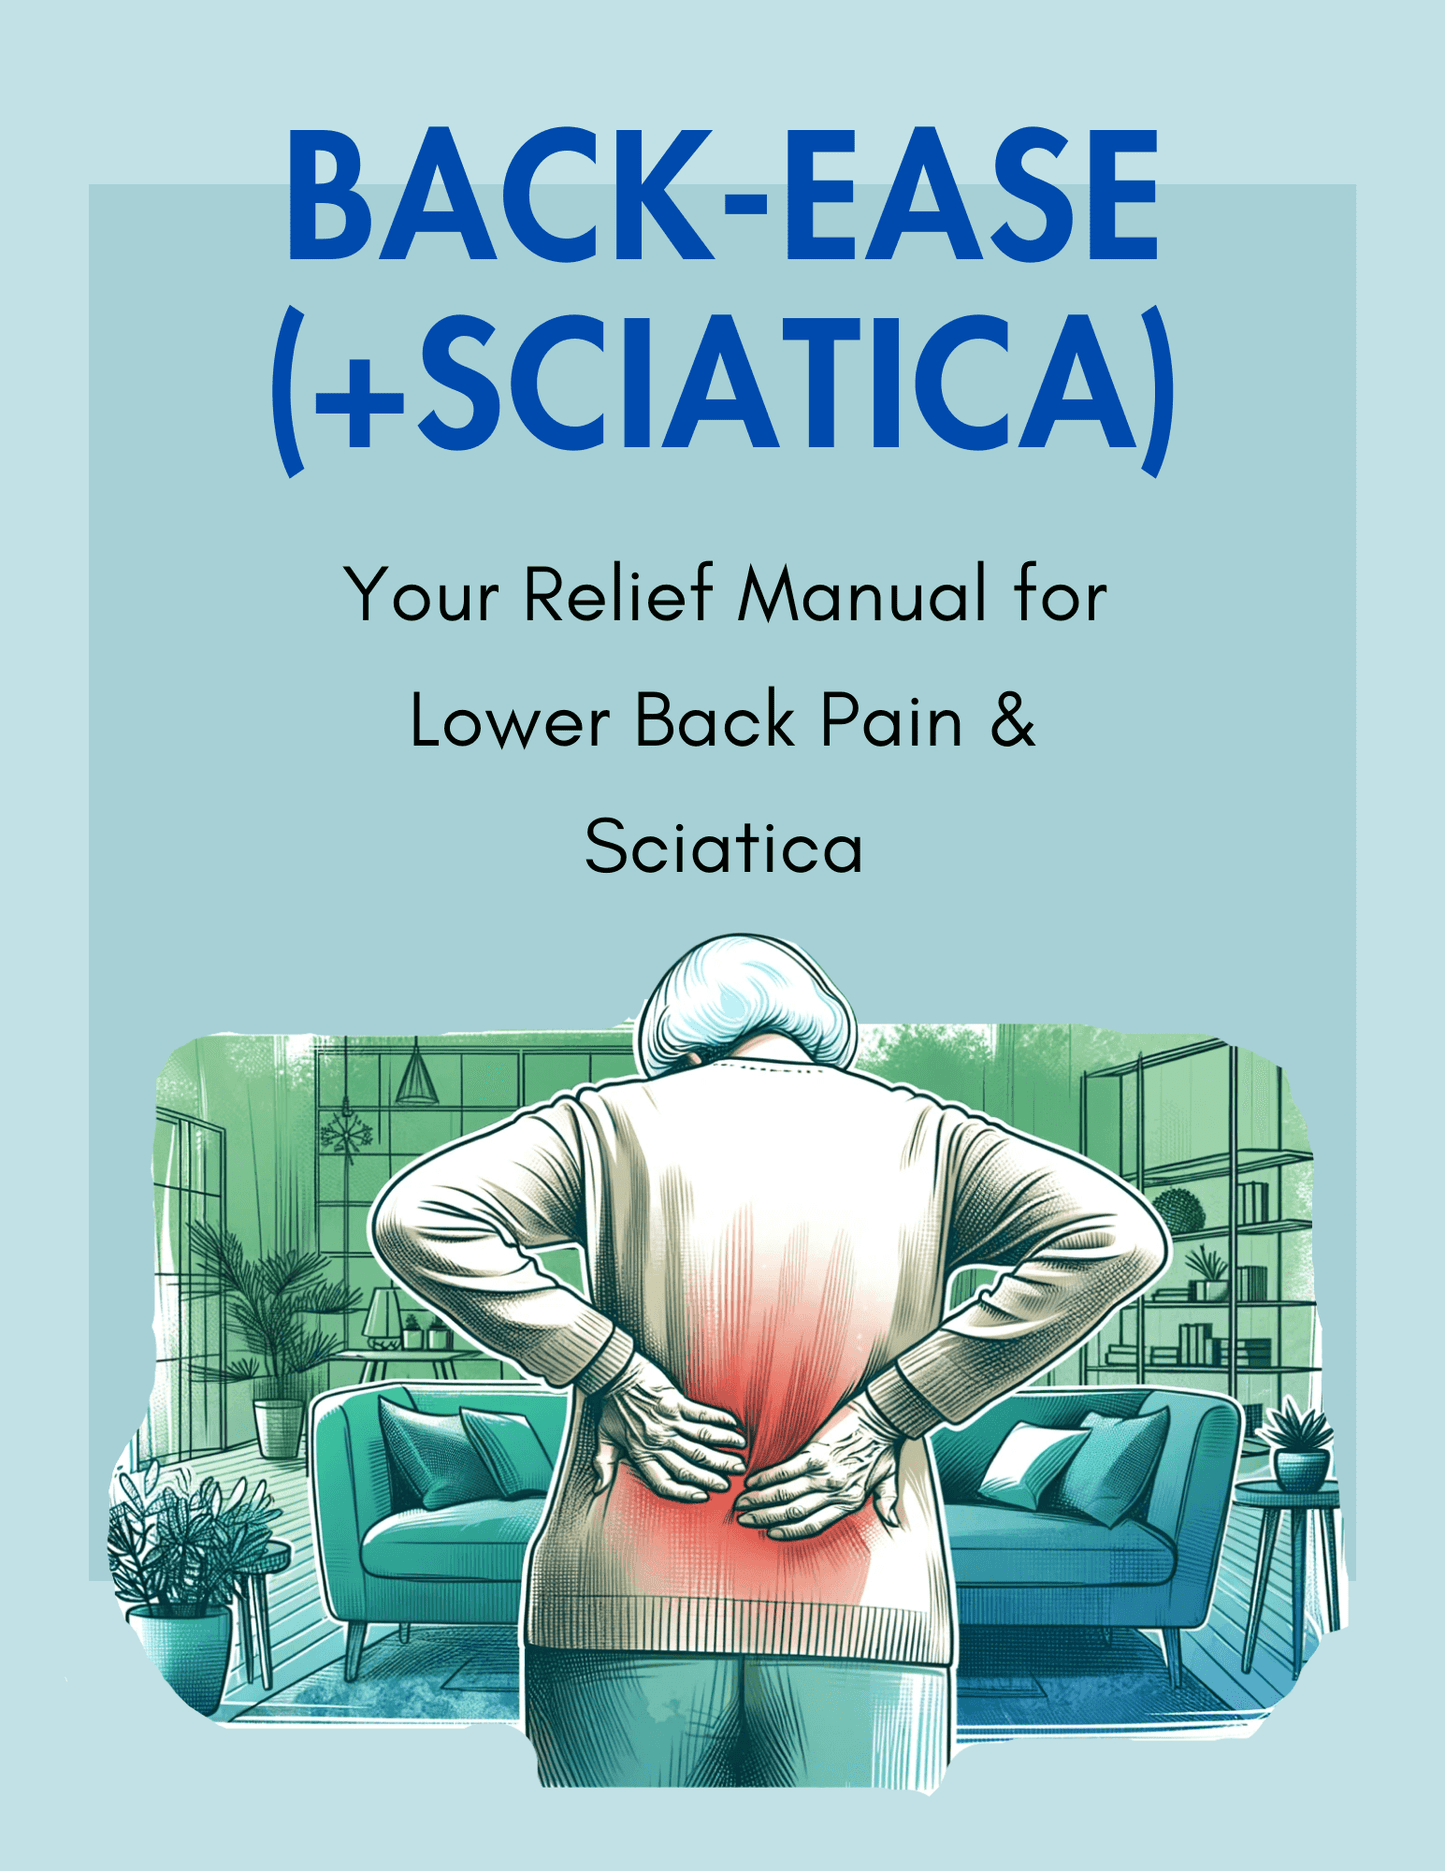 Back-Ease — Your Relief Manual for Lower Back Pain & Sciatica